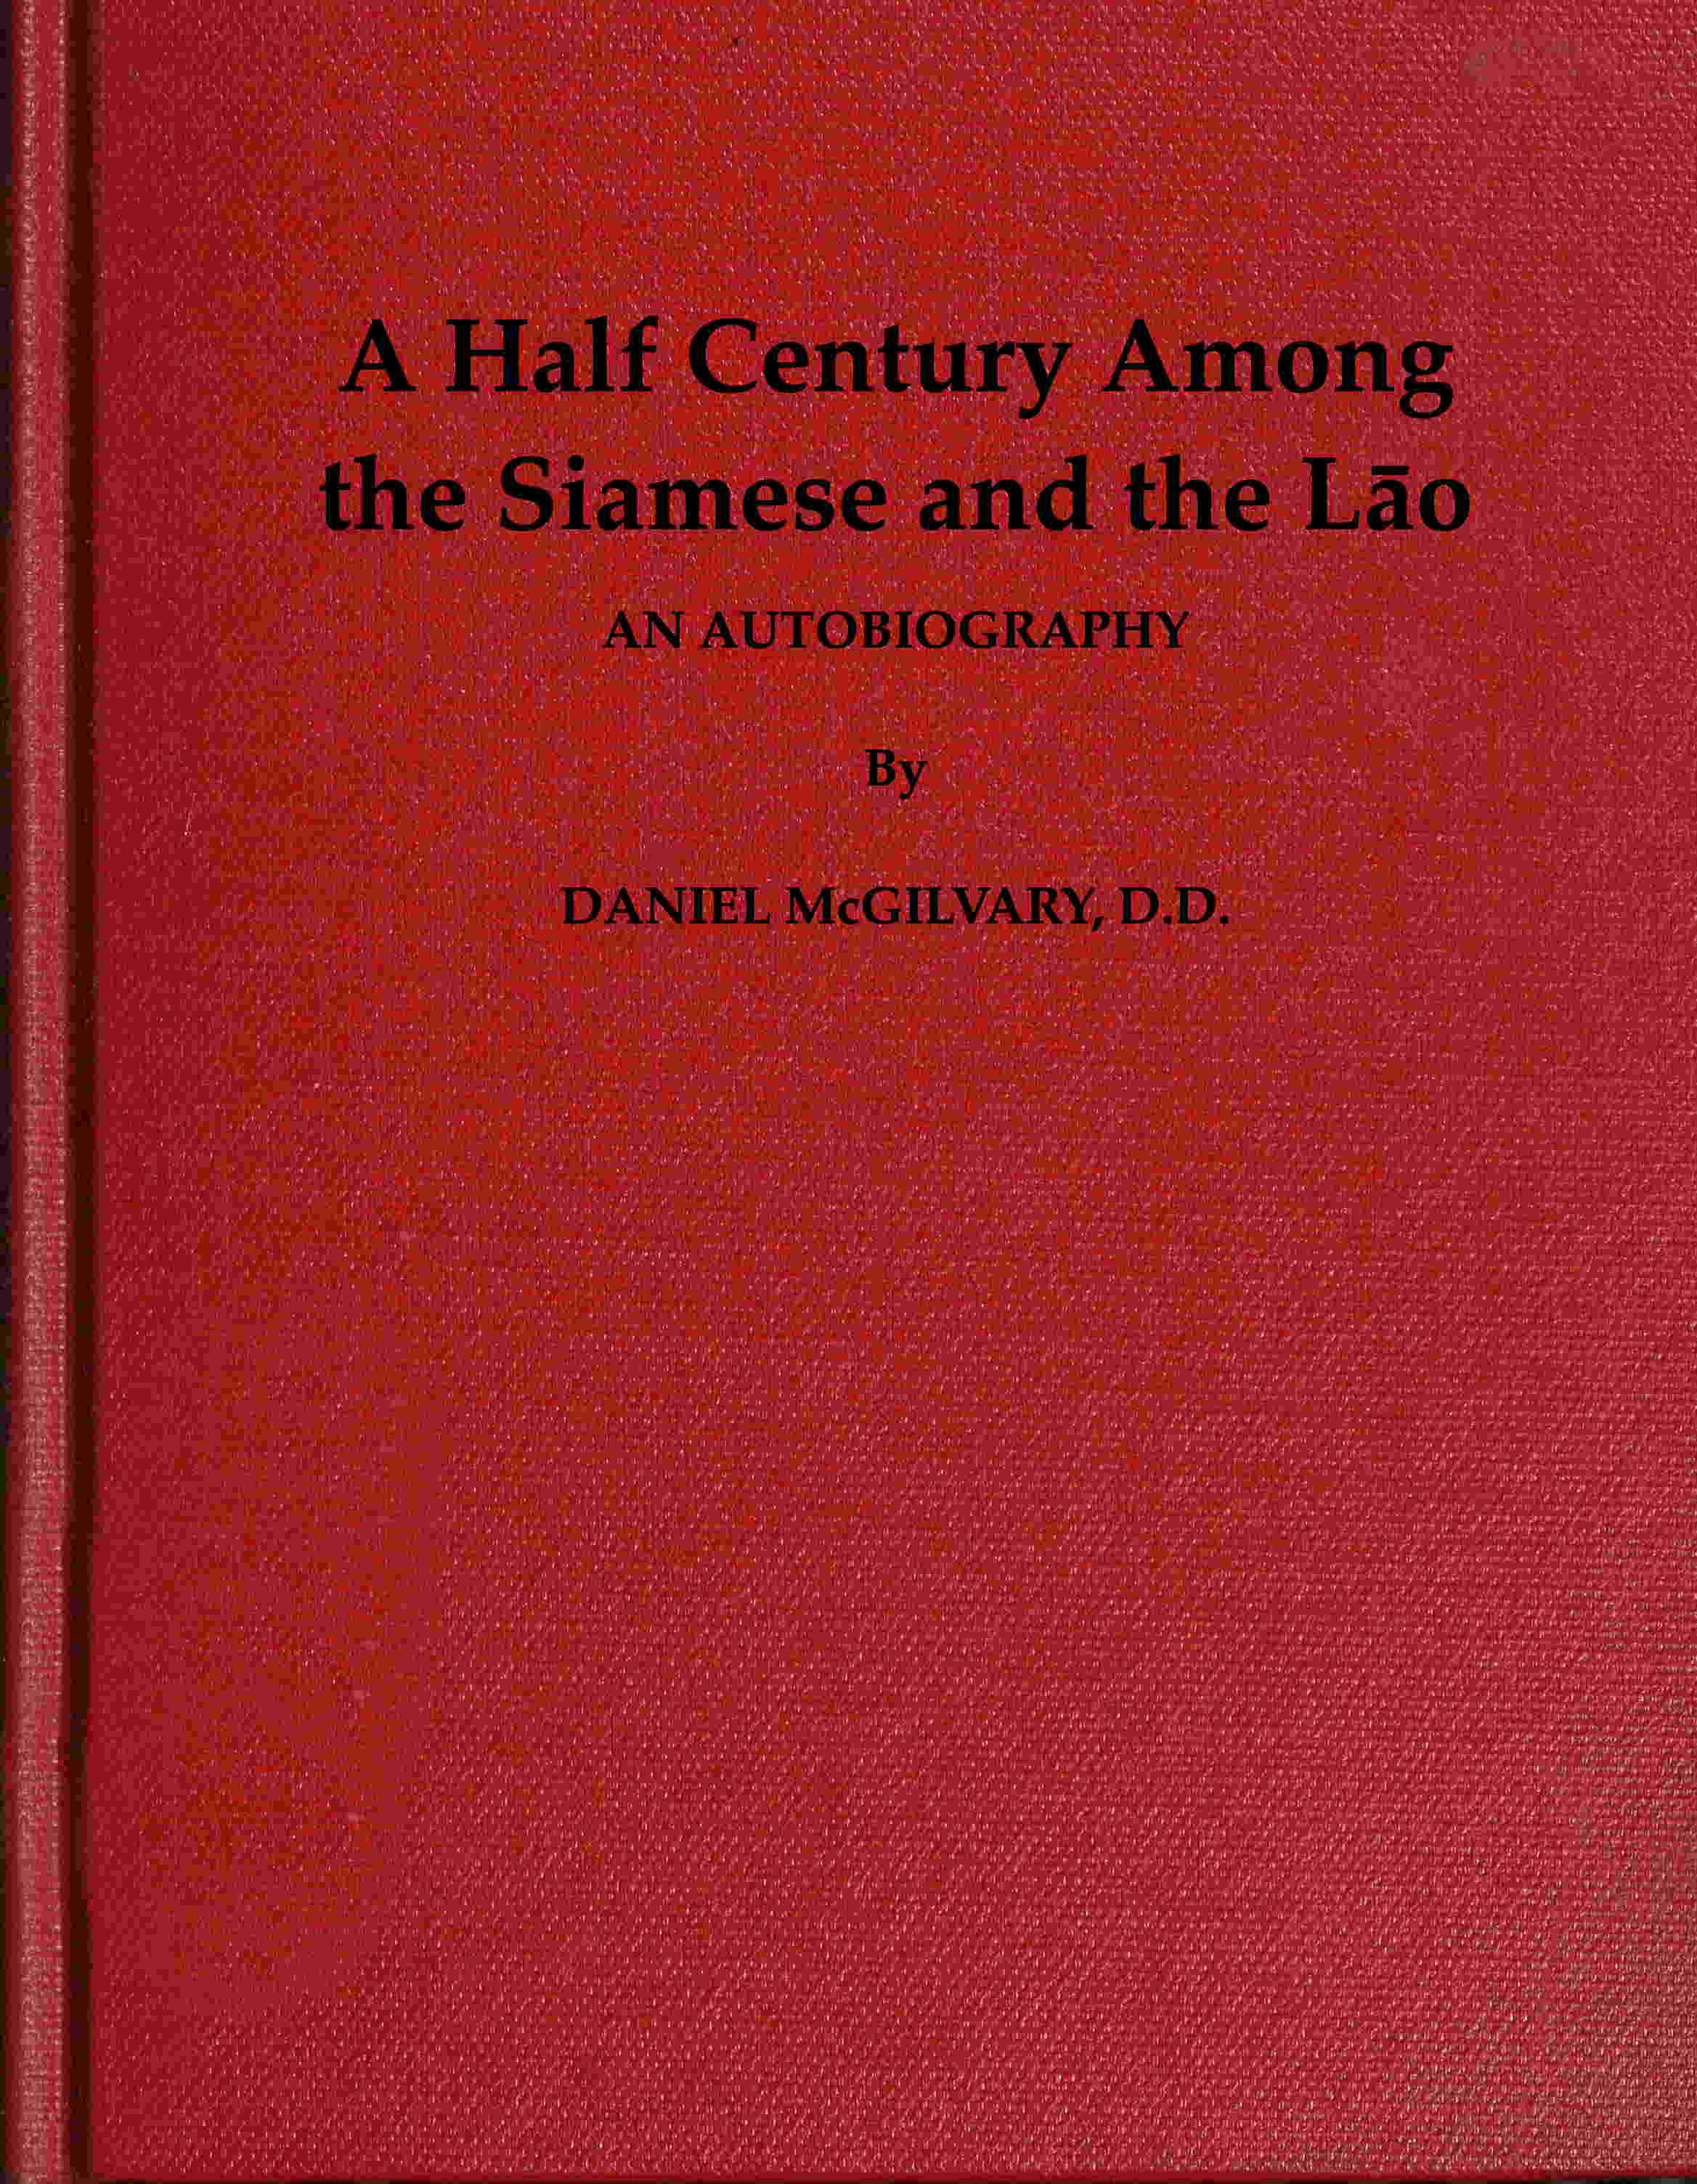 The Project Gutenberg eBook of A Half Century Among the Siamese and the Lāo, by Daniel McGilvary